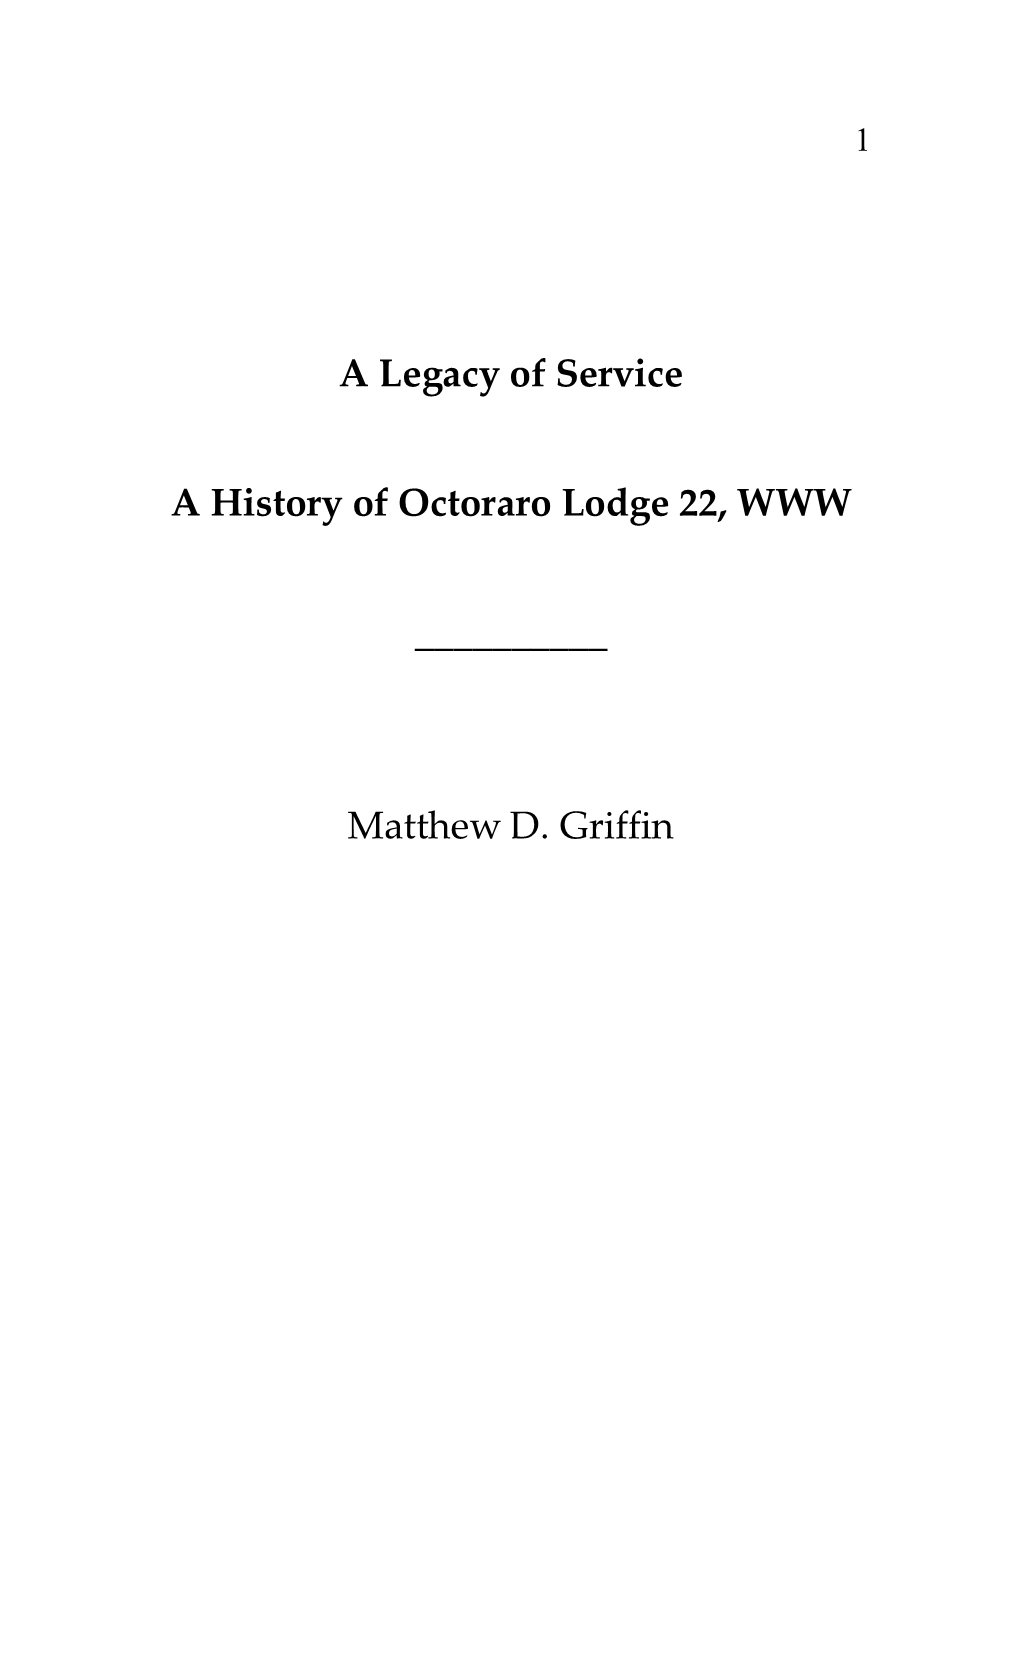 A Legacy of Service a History of Octoraro Lodge 22, WWW ___